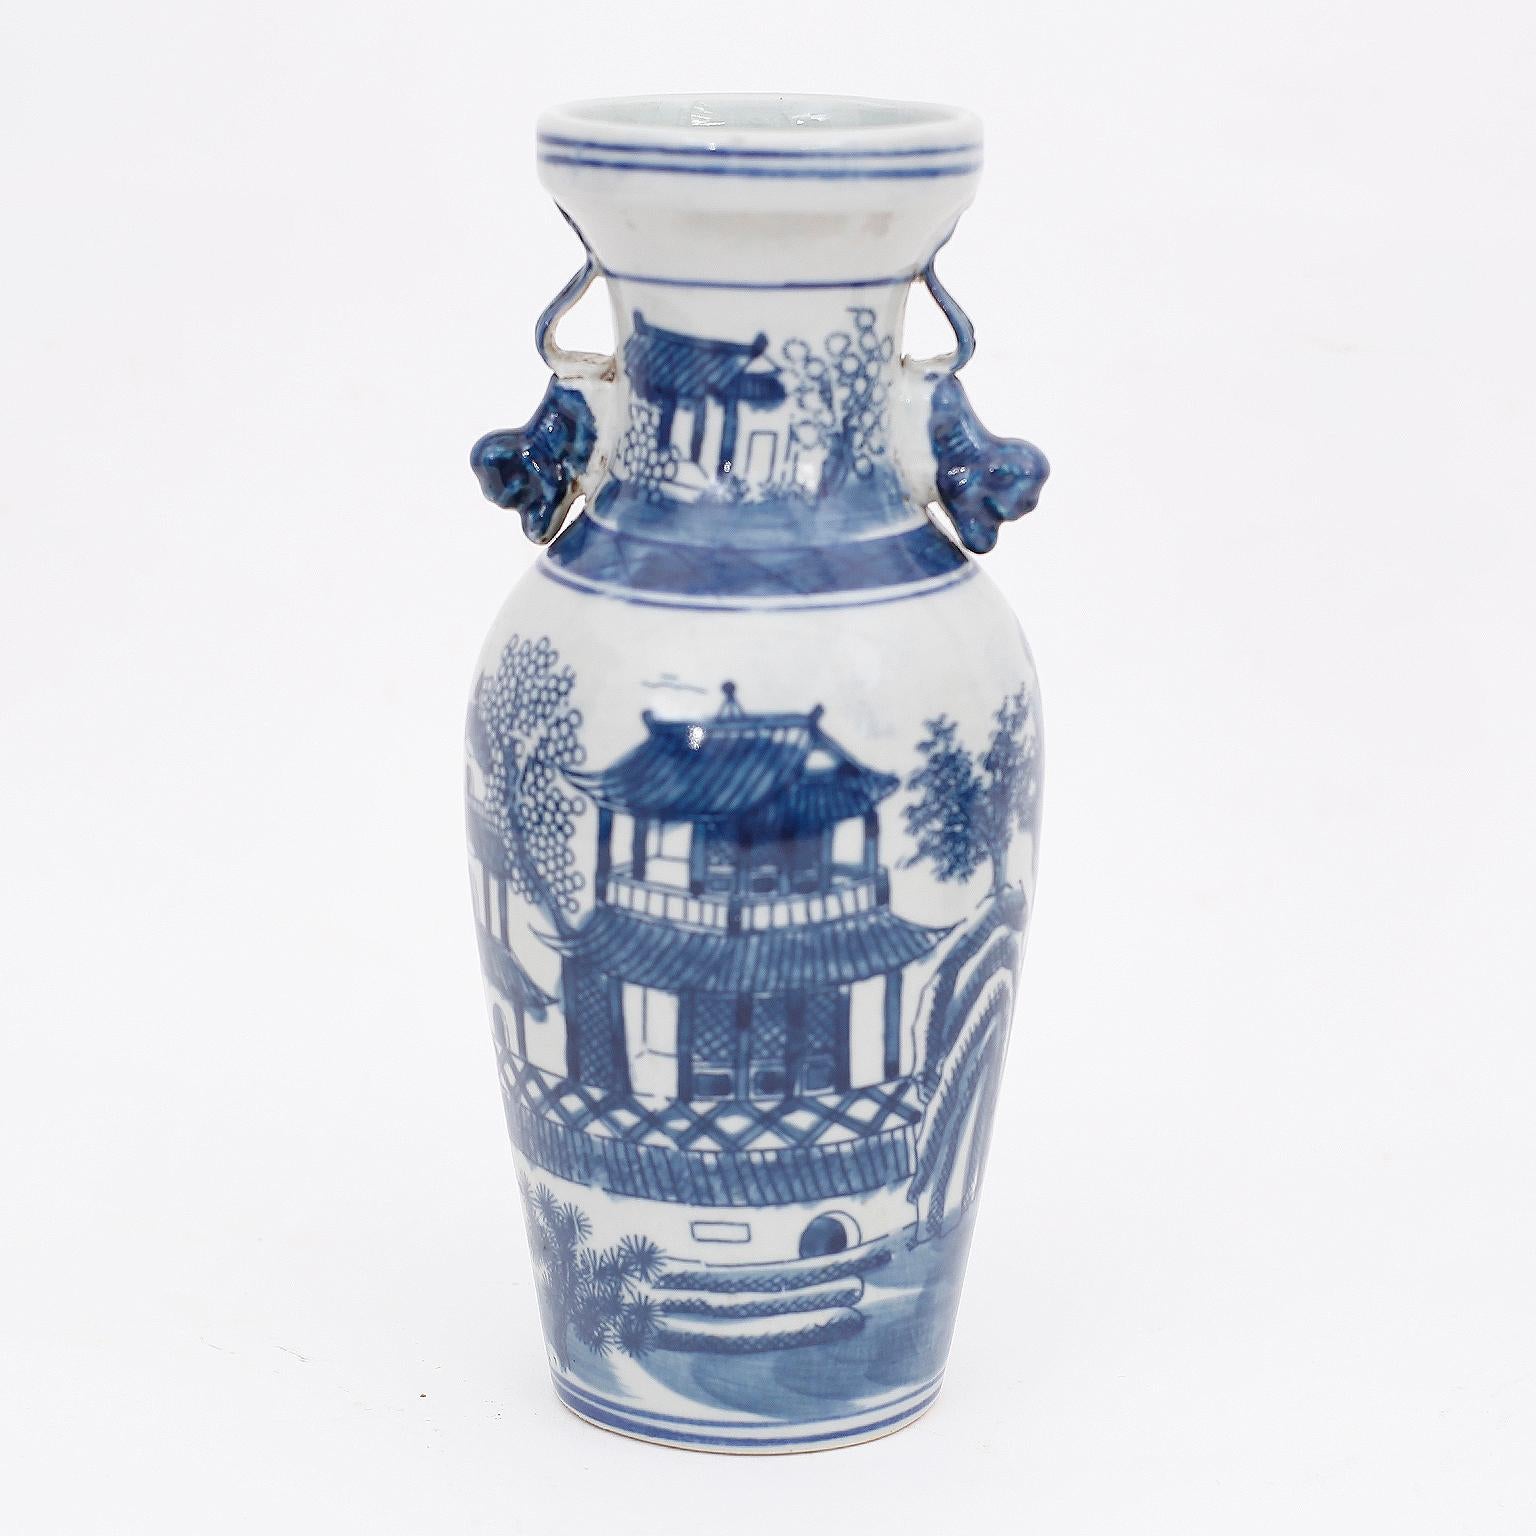 Chinese Export Pair of Blue and White Porcelain Vases with Pagodas